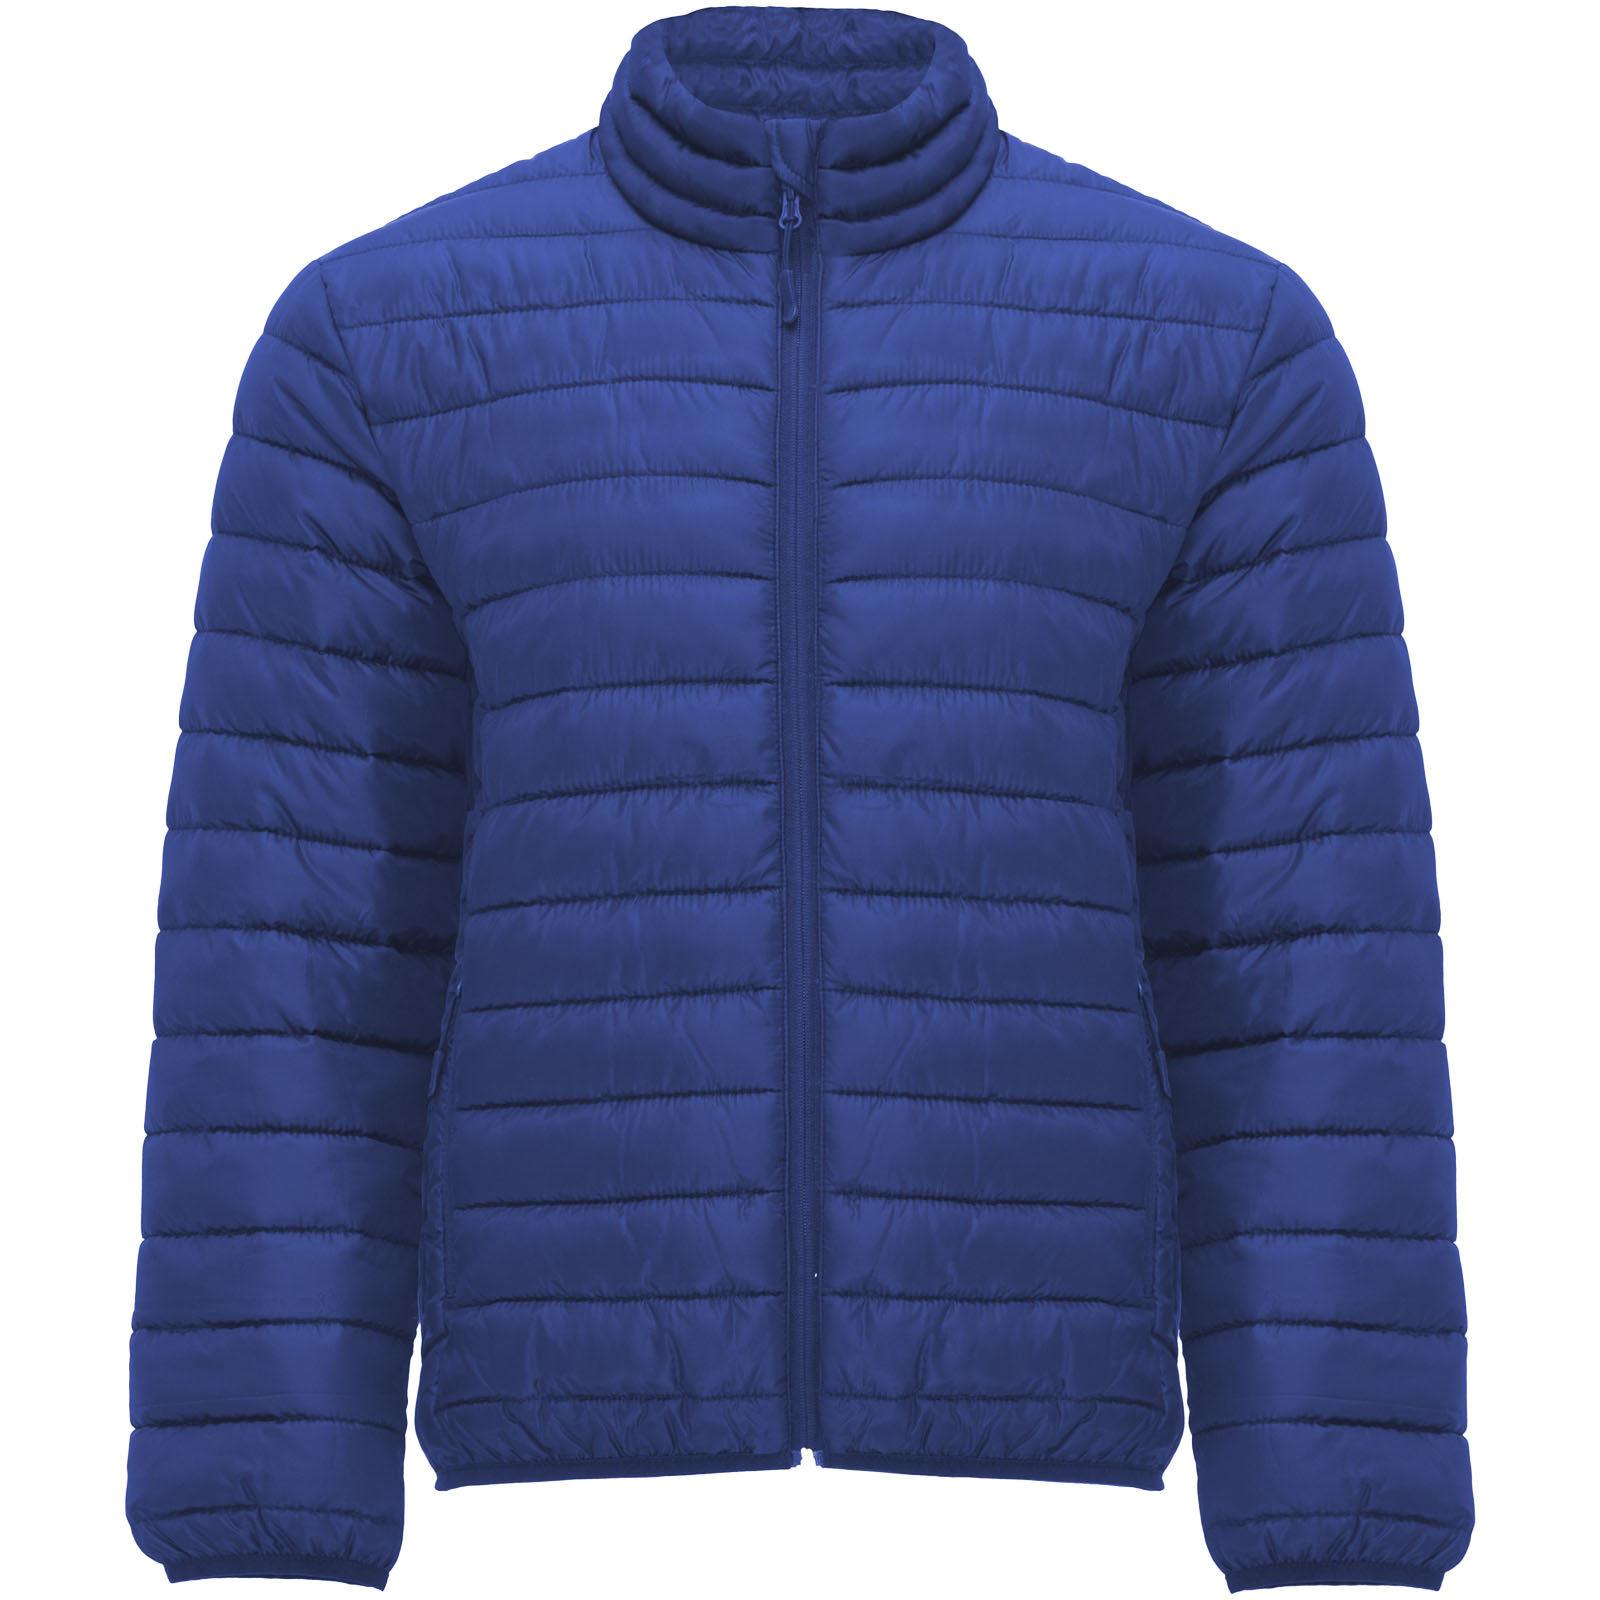 Clothing - Finland men's insulated jacket